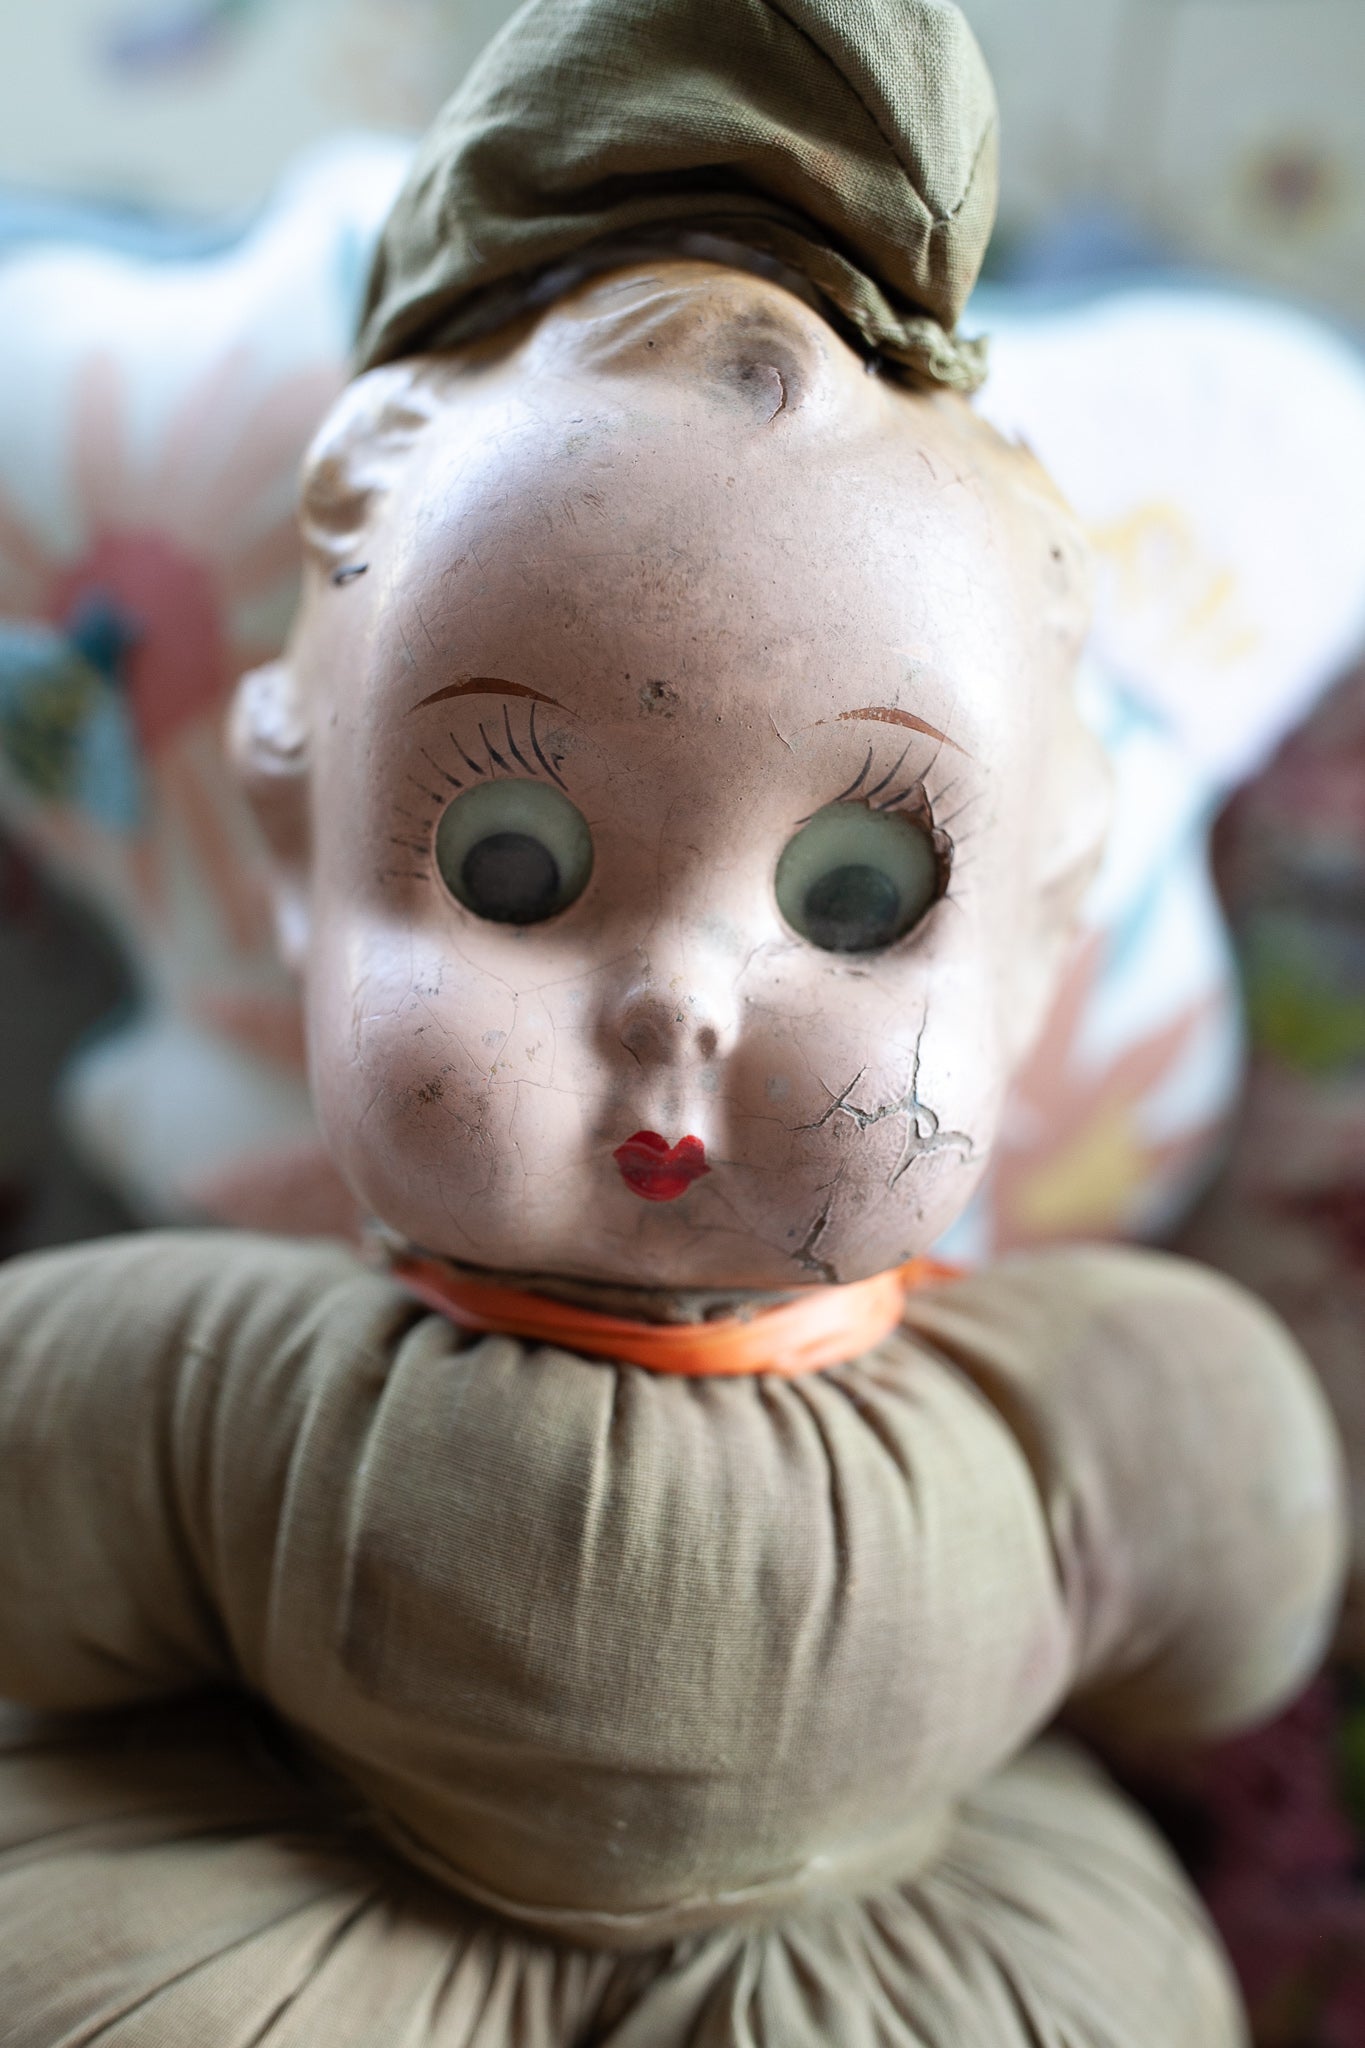 Vintage Googly Eyed Doll - Sailor Doll -Googly Eyed Sailor Boy Doll by Ralph A. Freundlich, Vintage 1937 Plush Toy with Google Eyes